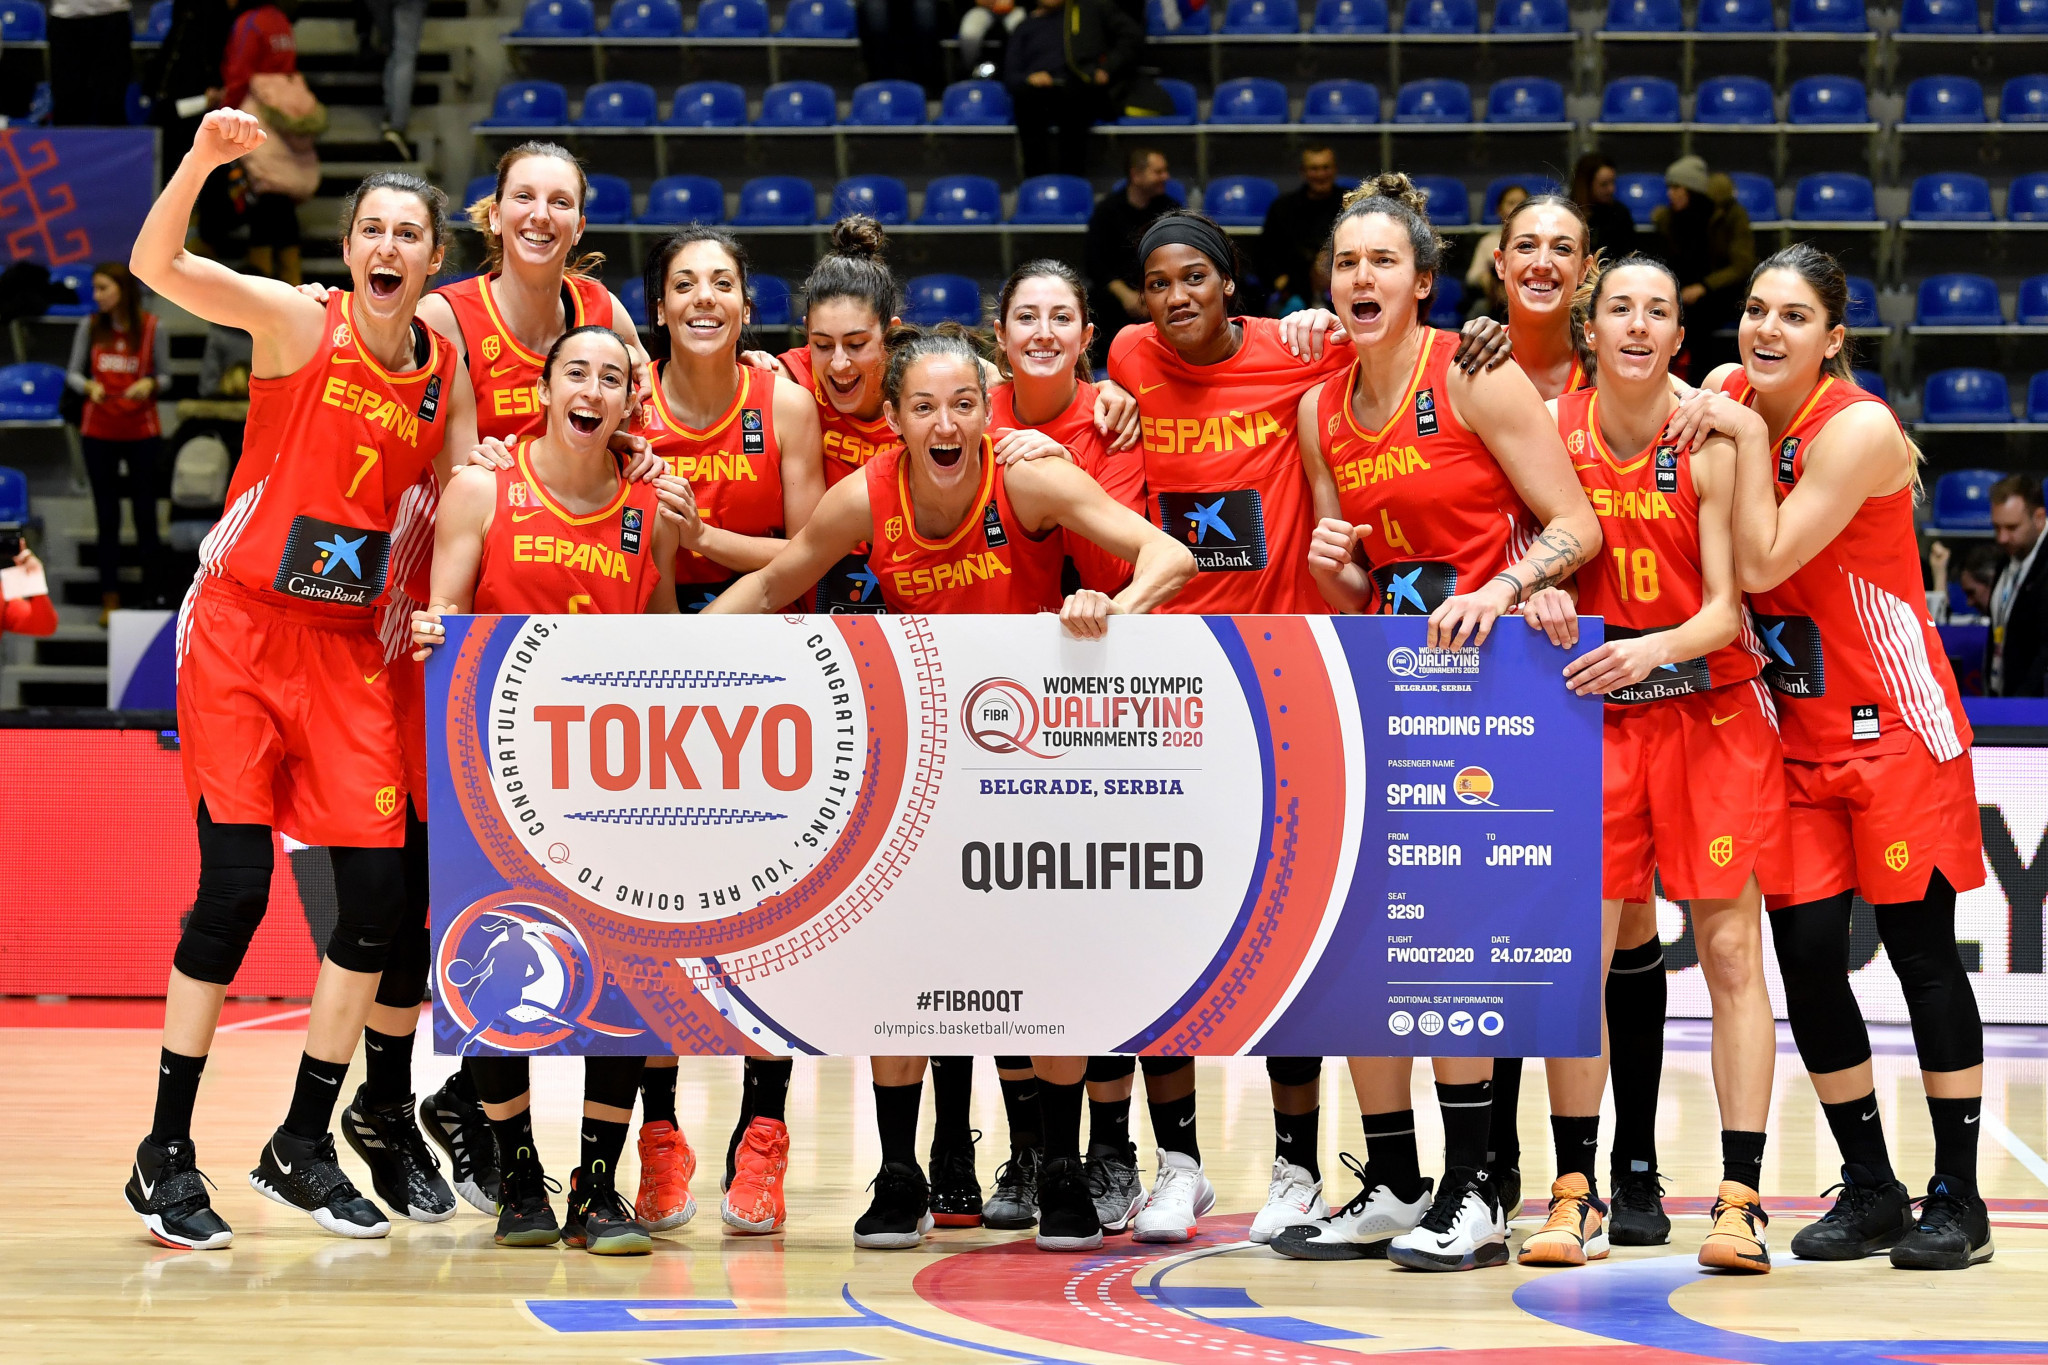 Spain advanced to the Tokyo 2020 women's basketball tournament ©Getty Images